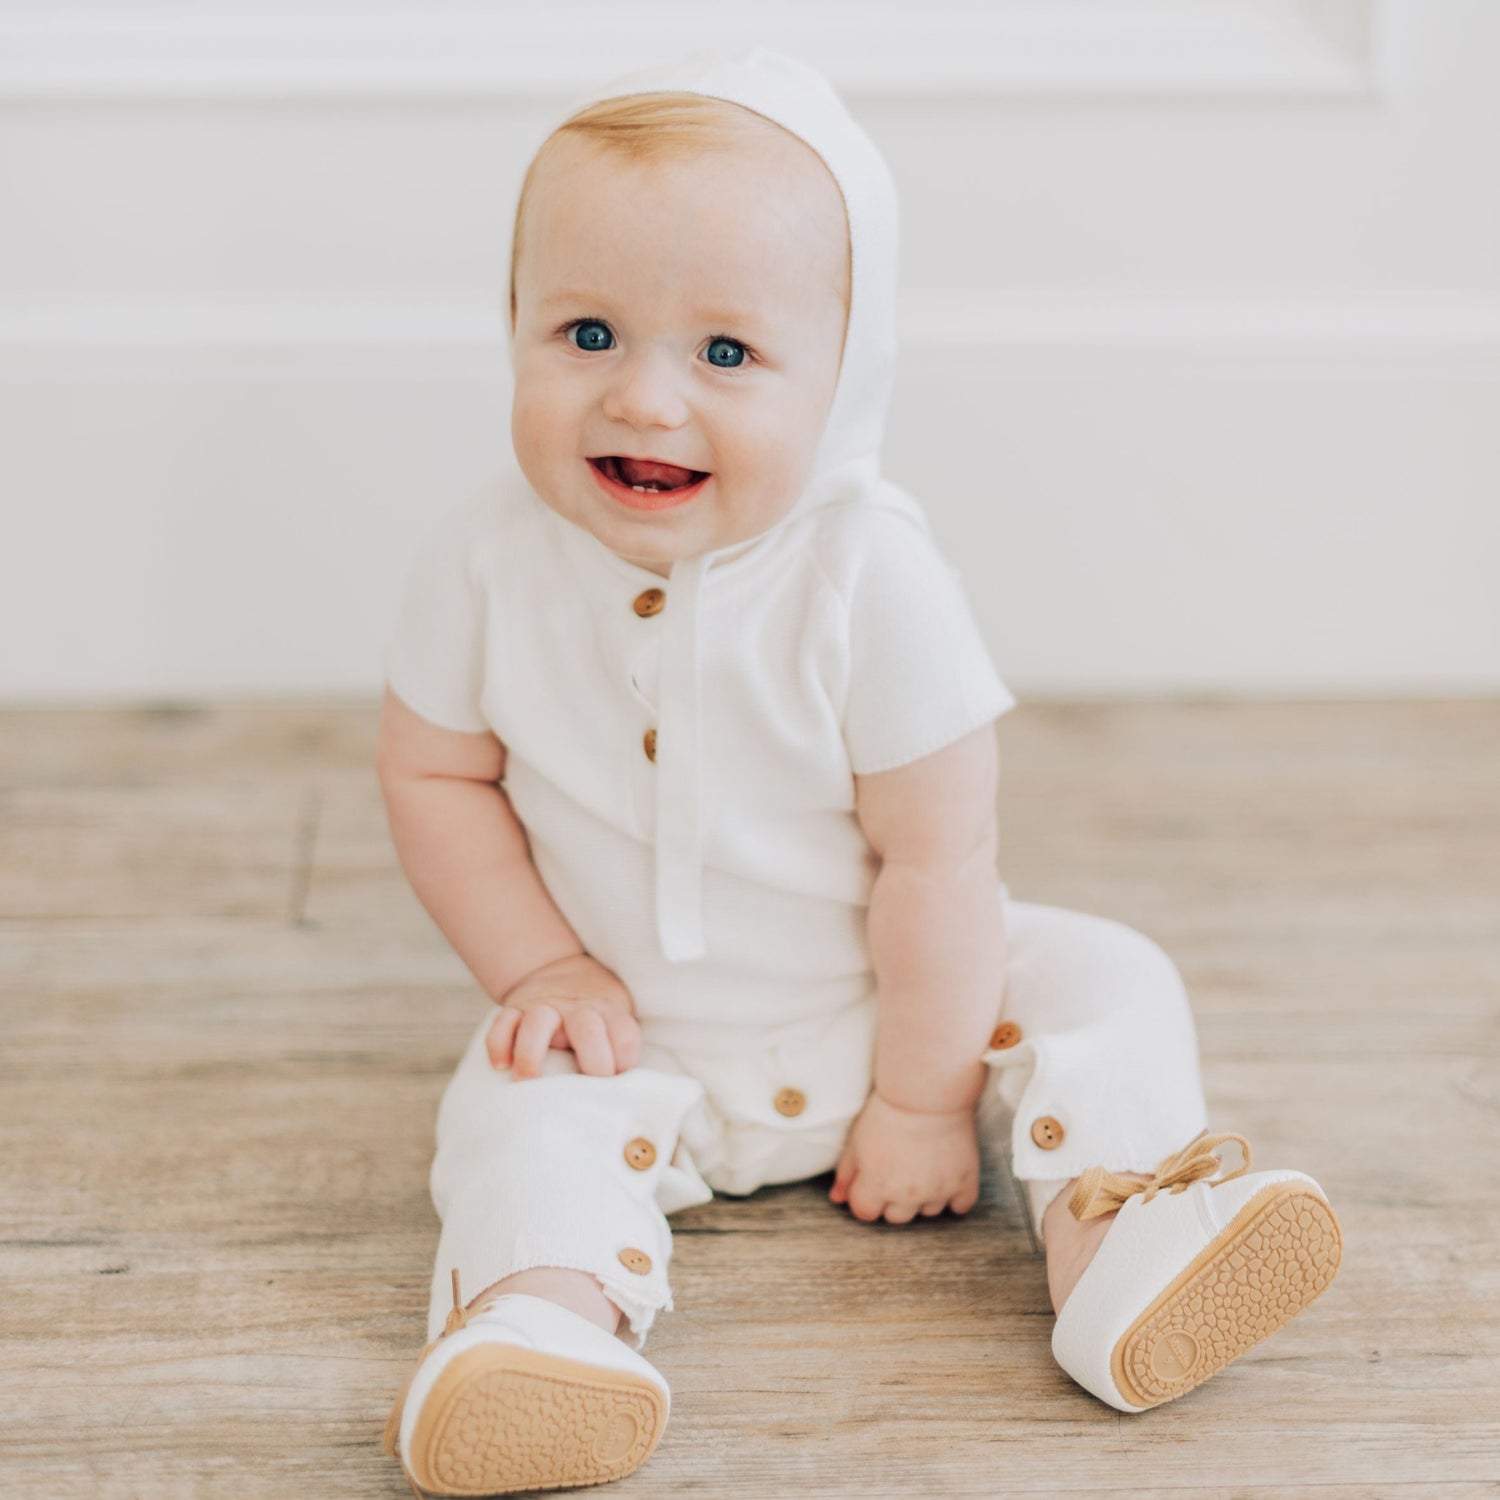 Baby boy sitting up on the ground smiling in a white blessing outfit.